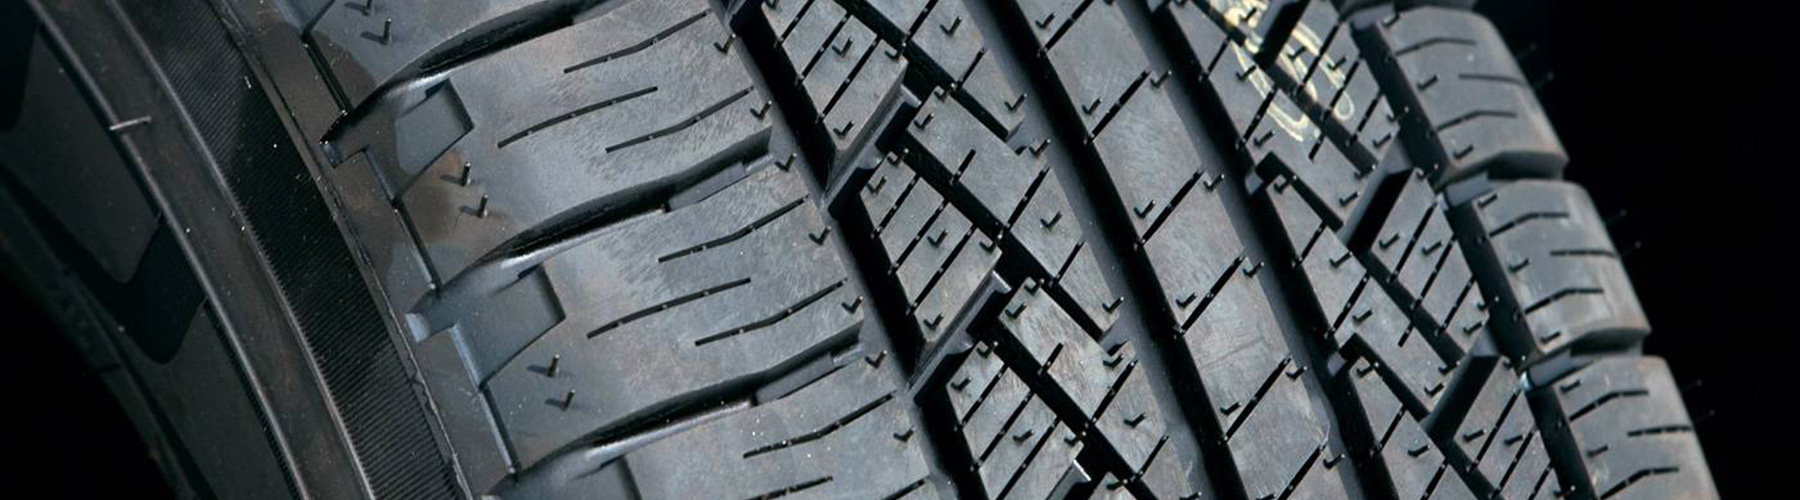 Tire Replacement Near Me in Briarcliff Manor, Westchester ...